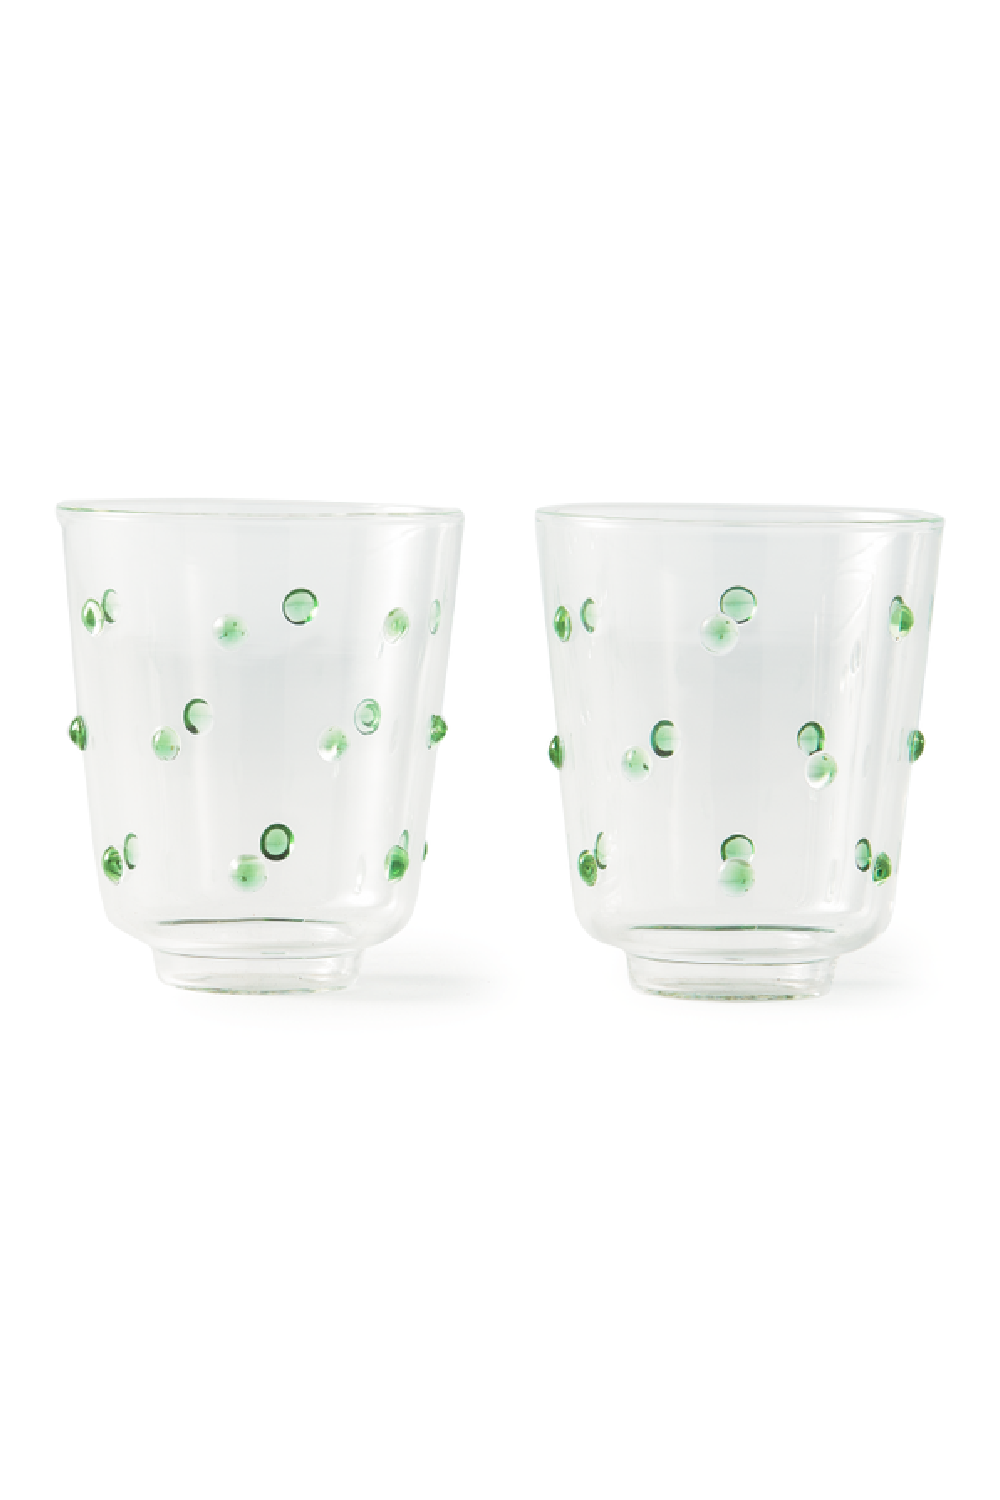 Image of Green Dotted Glass Tumbler | Pols Potten Nob